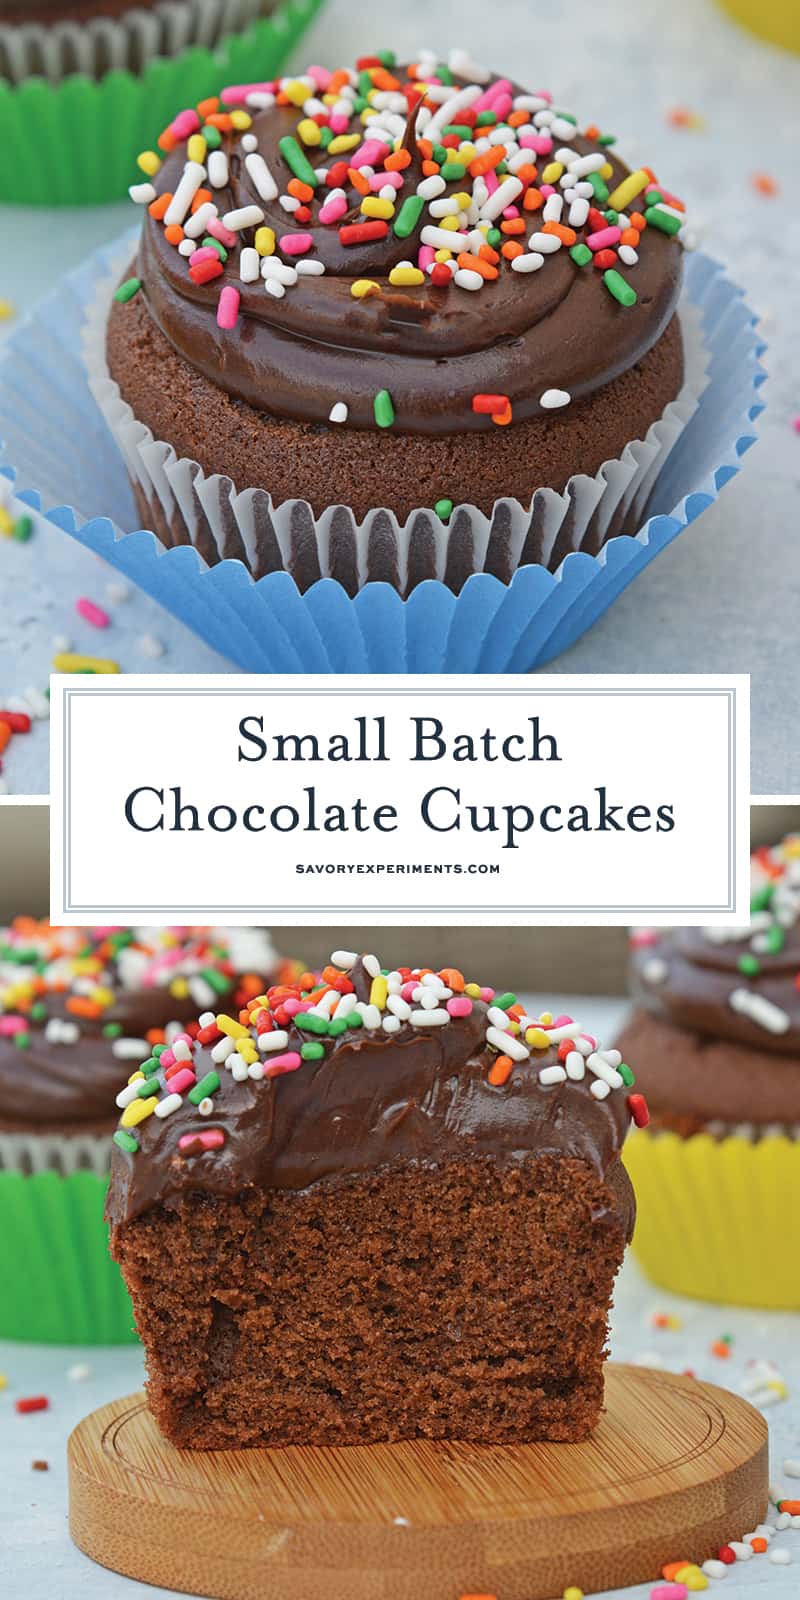 Small Batch Chocolate Cupcakes are the perfect easy homemade chocolate cupcakes for when you just NEED a cupcake but not an entire batch! Makes just 6 cupcakes! #smallbatchcupcakes #homemadechocolatecupcakes www.savoryexperiments.com